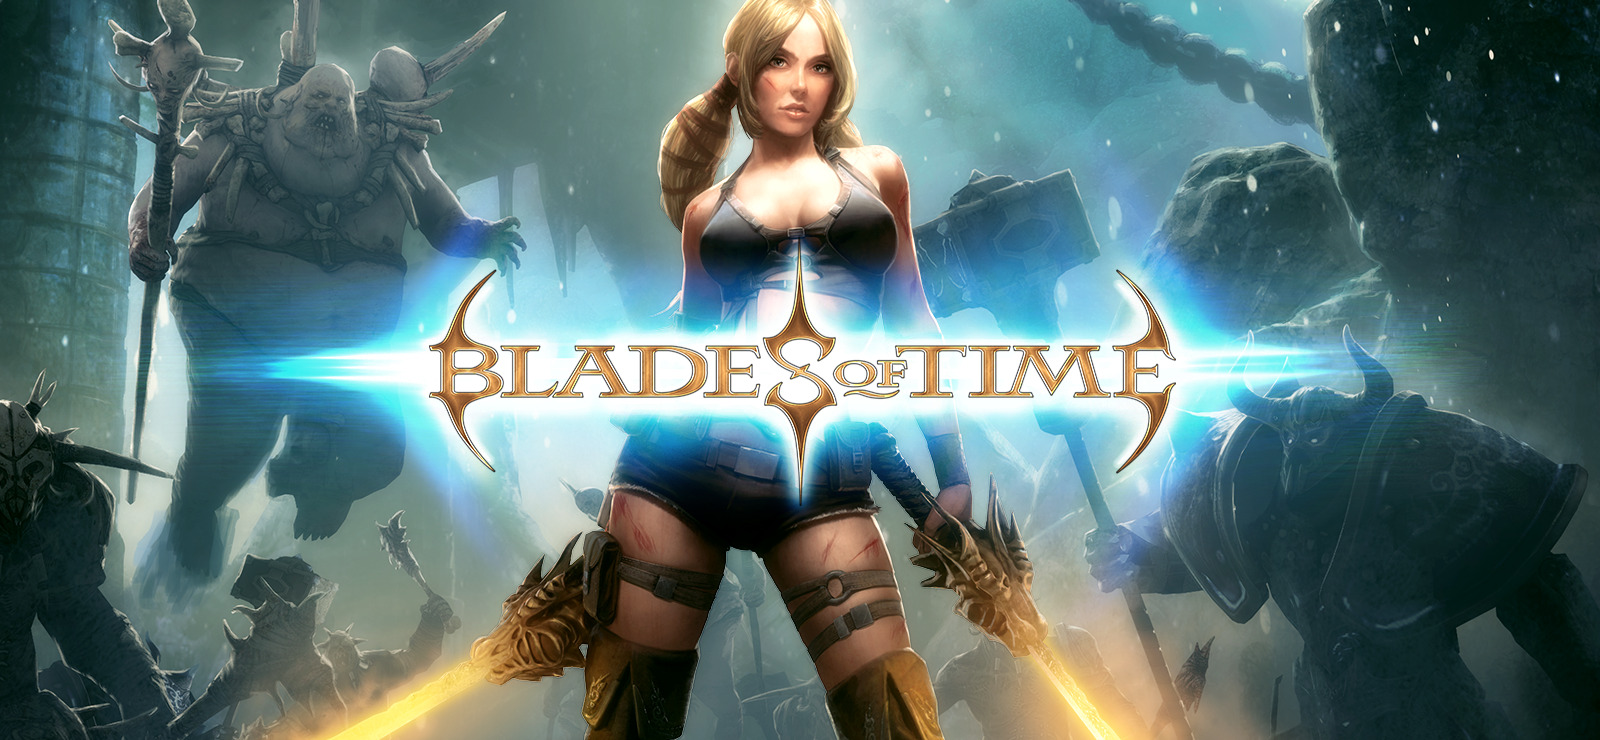 Blades of time steam фото 15